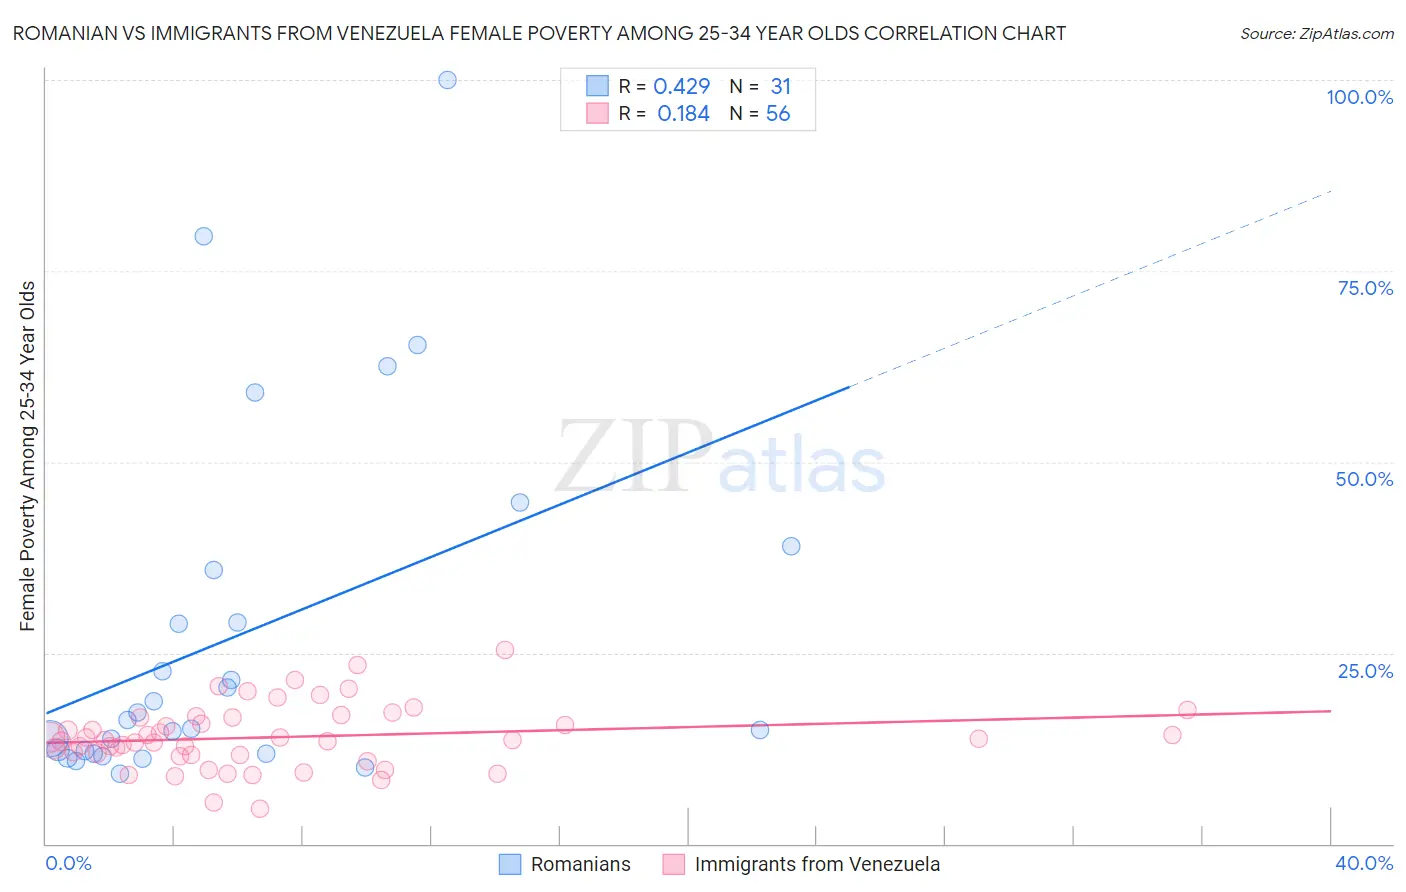 Romanian vs Immigrants from Venezuela Female Poverty Among 25-34 Year Olds